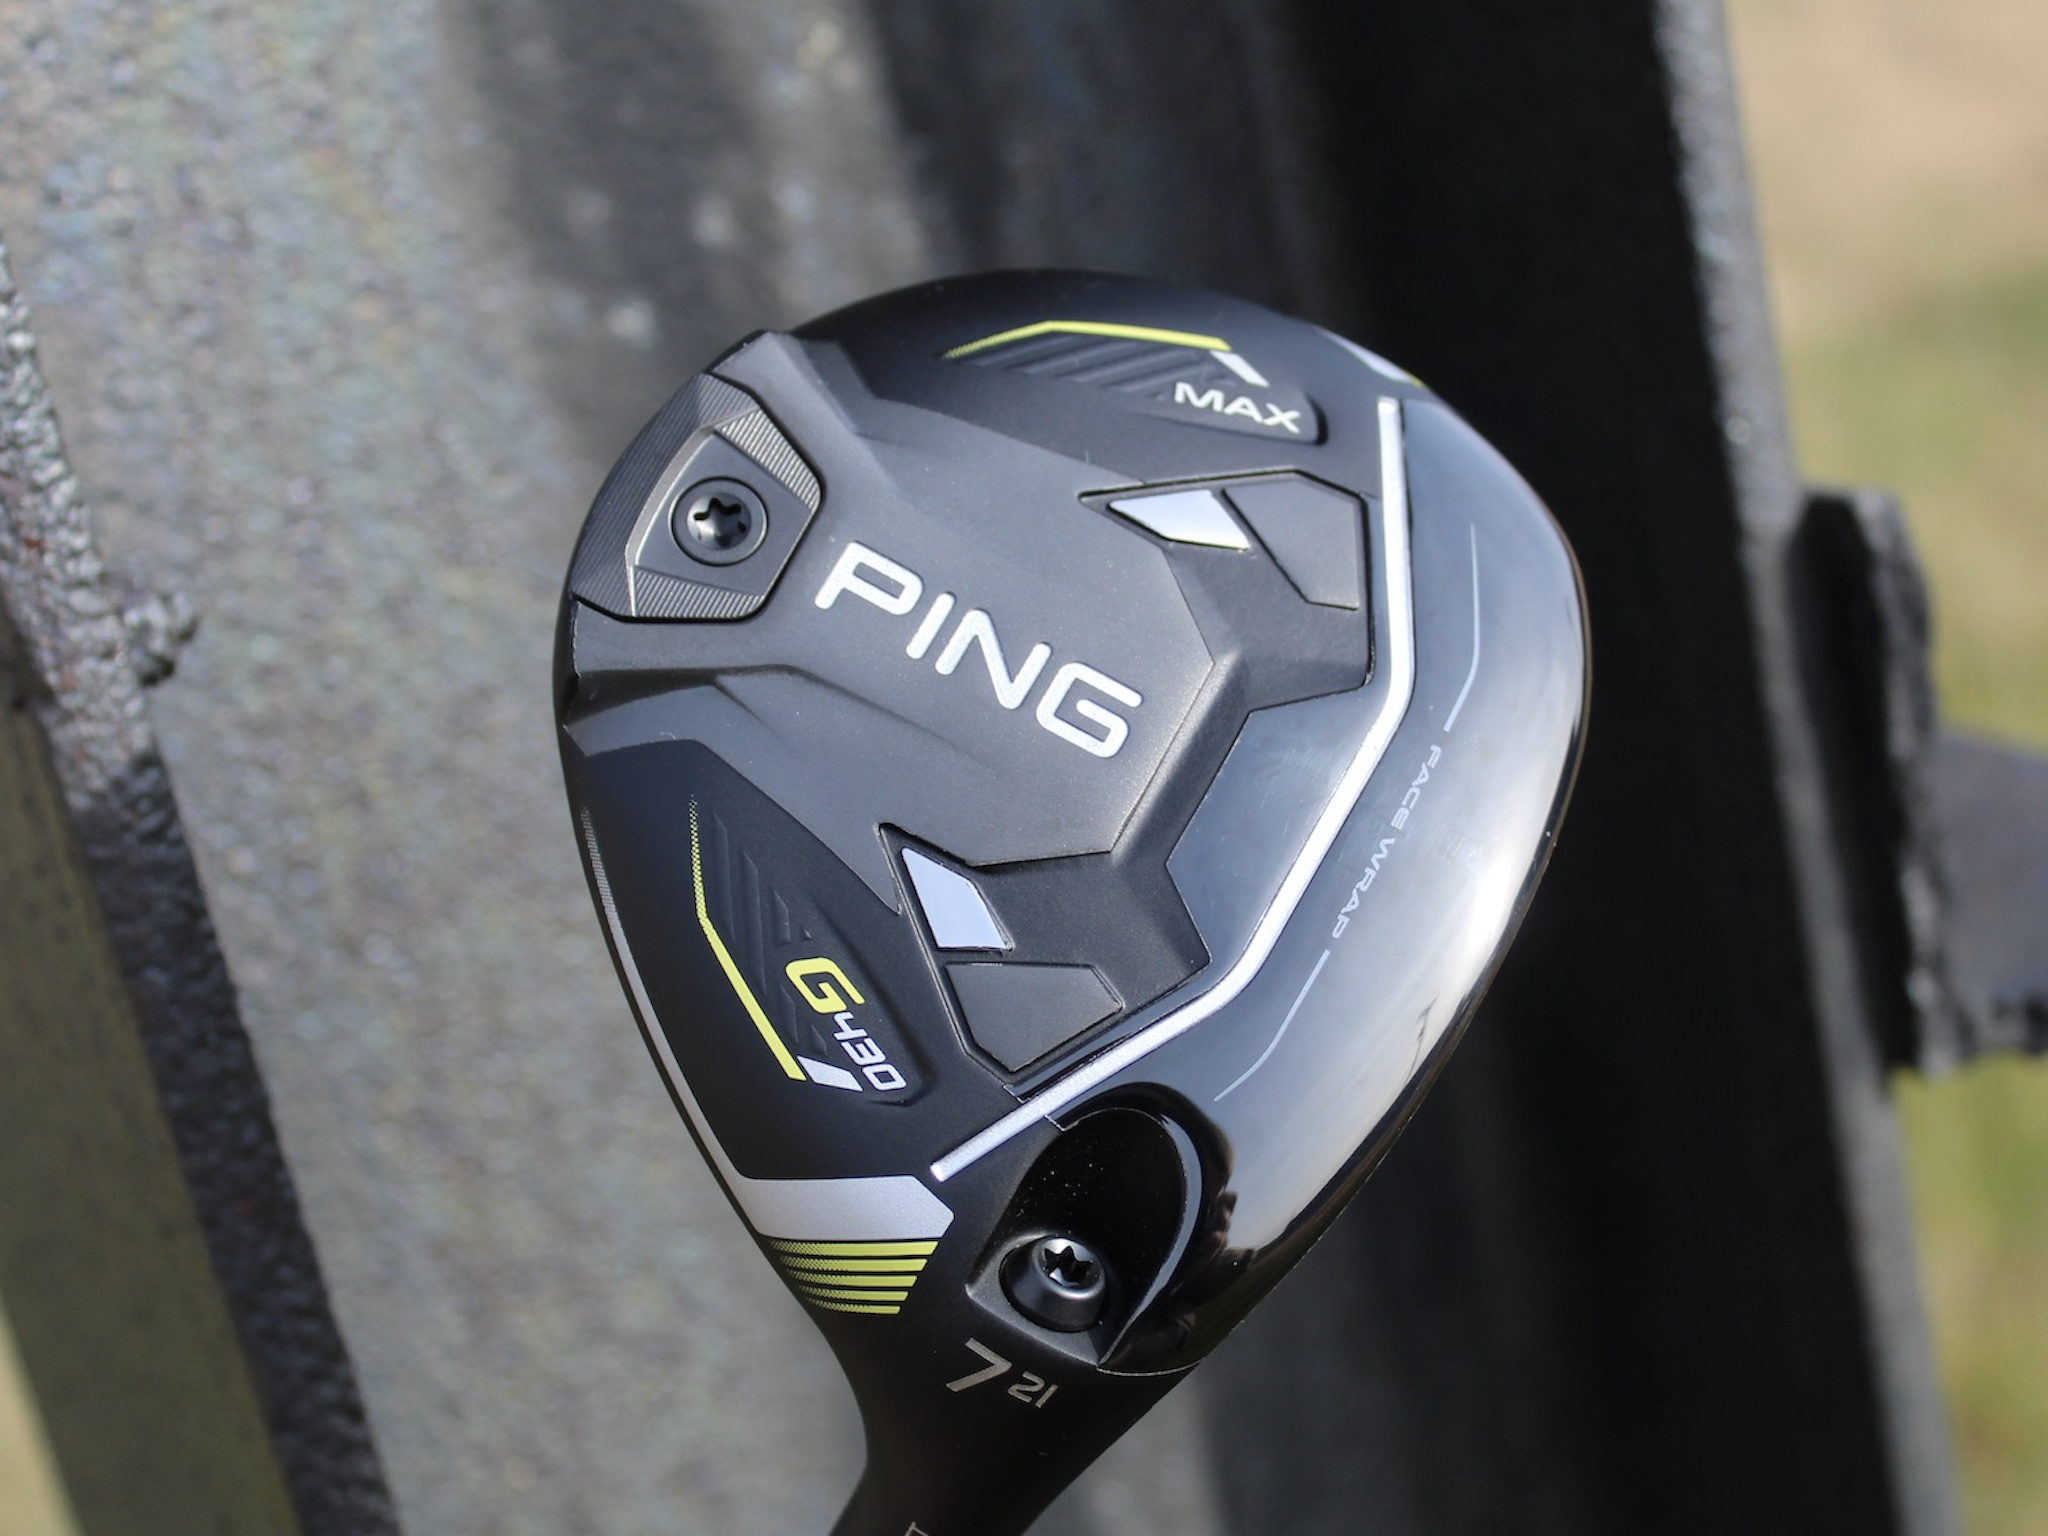 Ping introduces new G430 fairway woods and hybrids – GolfWRX